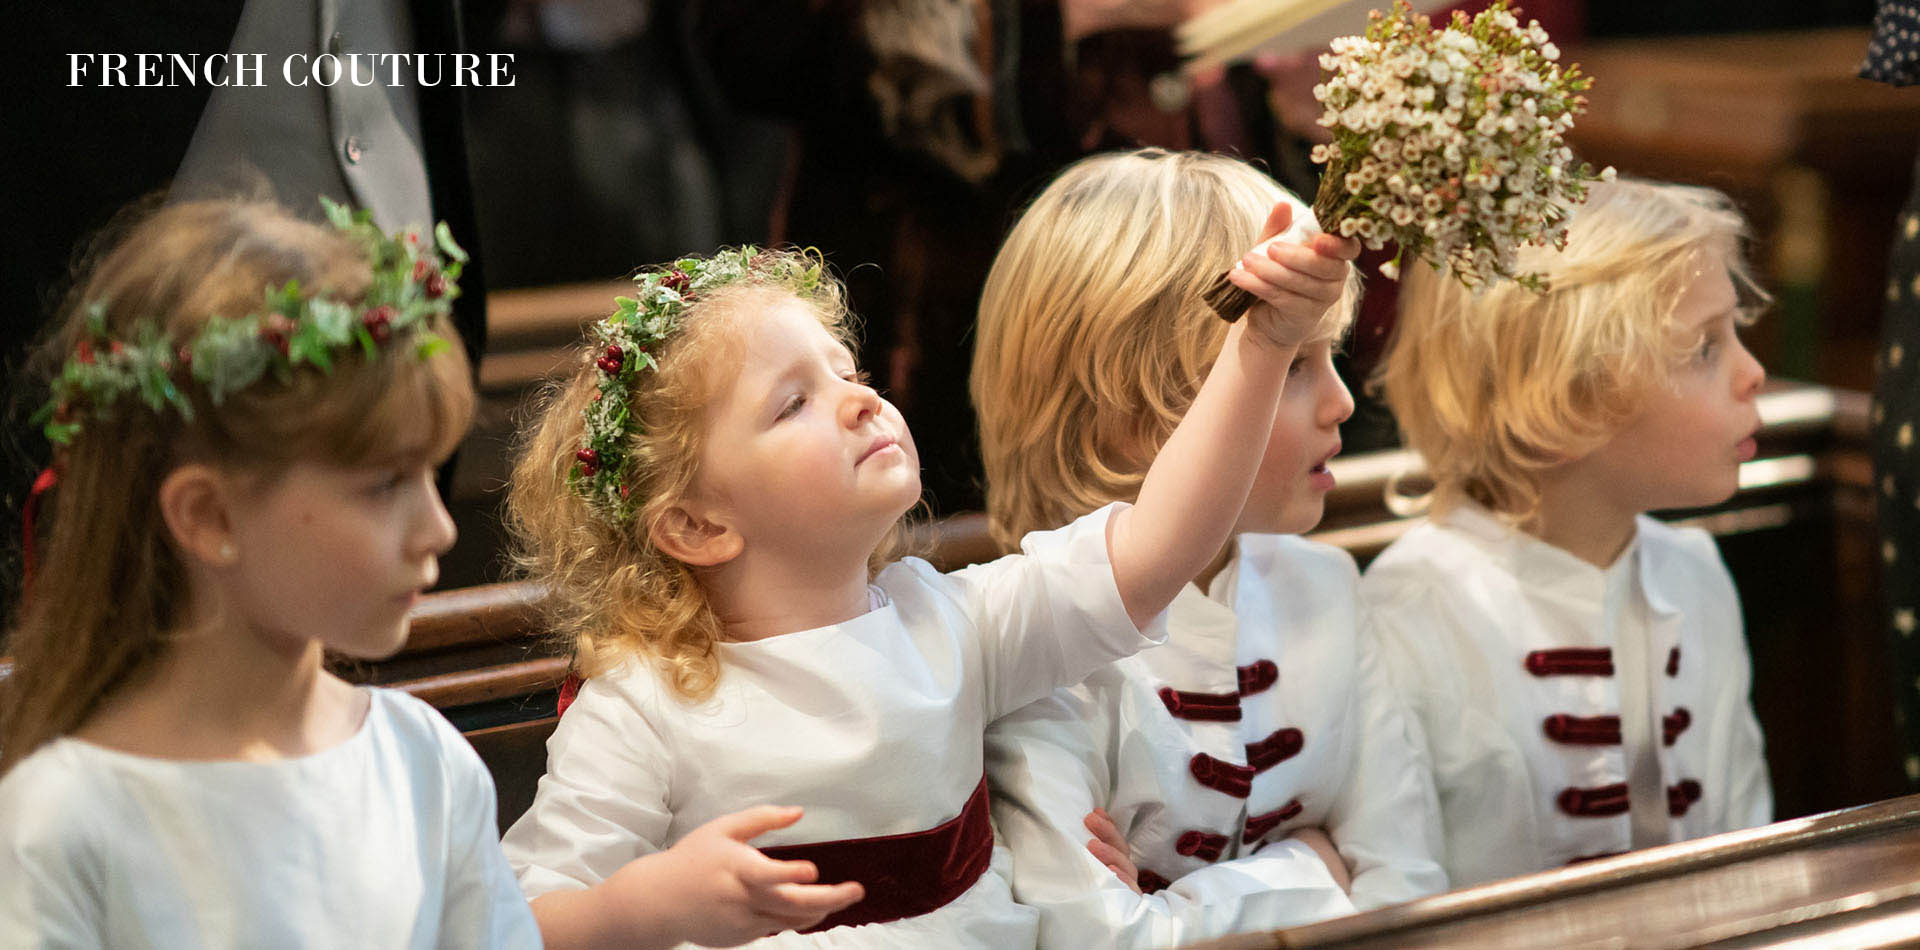 real weddings: flower girl dresses uk traditinoal page boy outfits by little eglantine